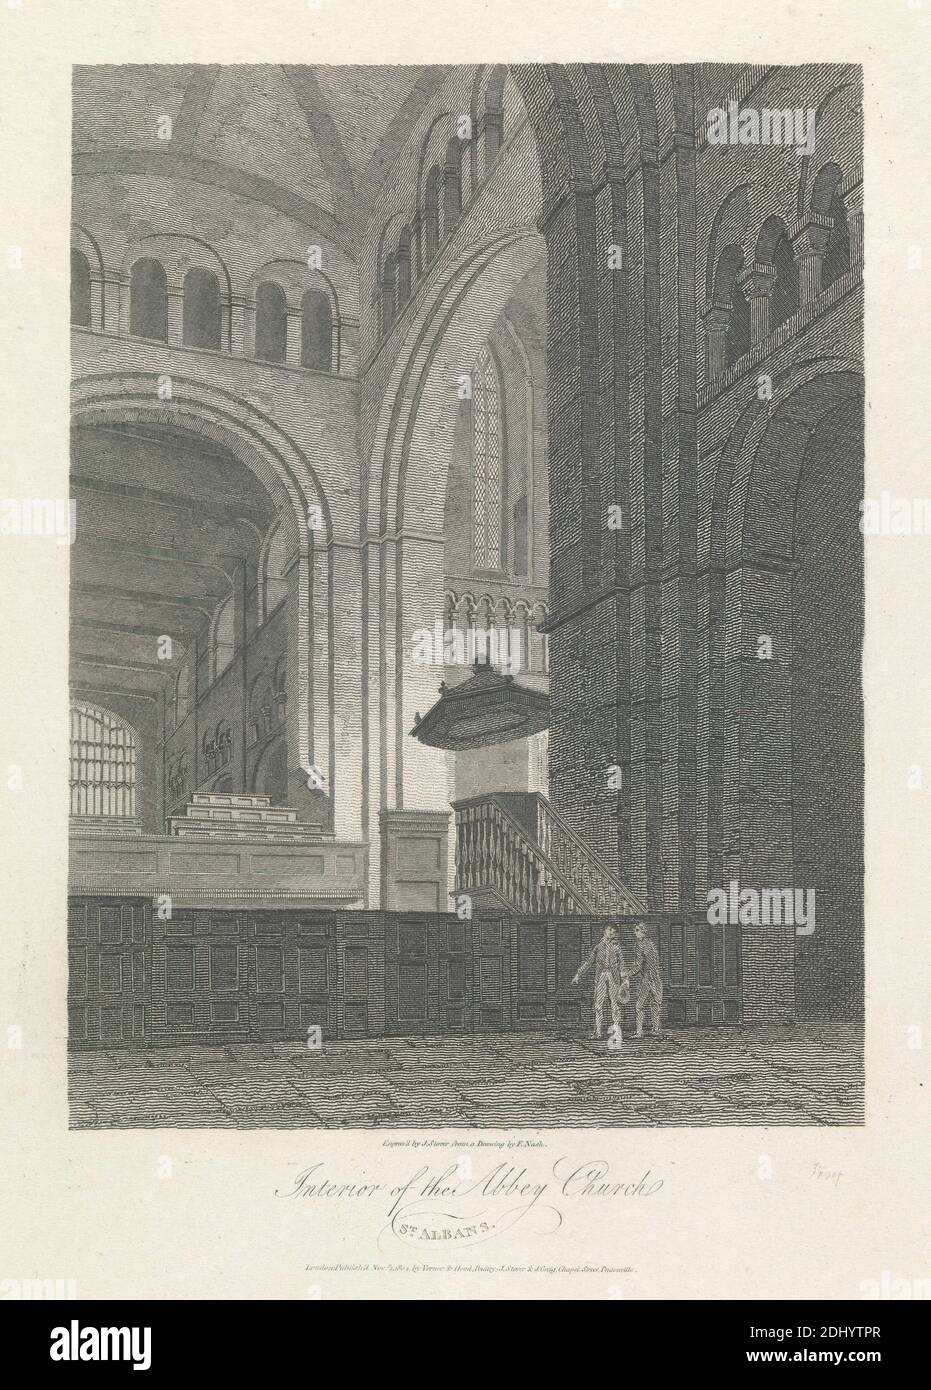 Interior of the Abbey Church, St. Albans, Outer Suburb - North, James S. Storer, 1771–1853, British, after Frederick Nash, 1782–1856, British, 1804, Engraving Stock Photo